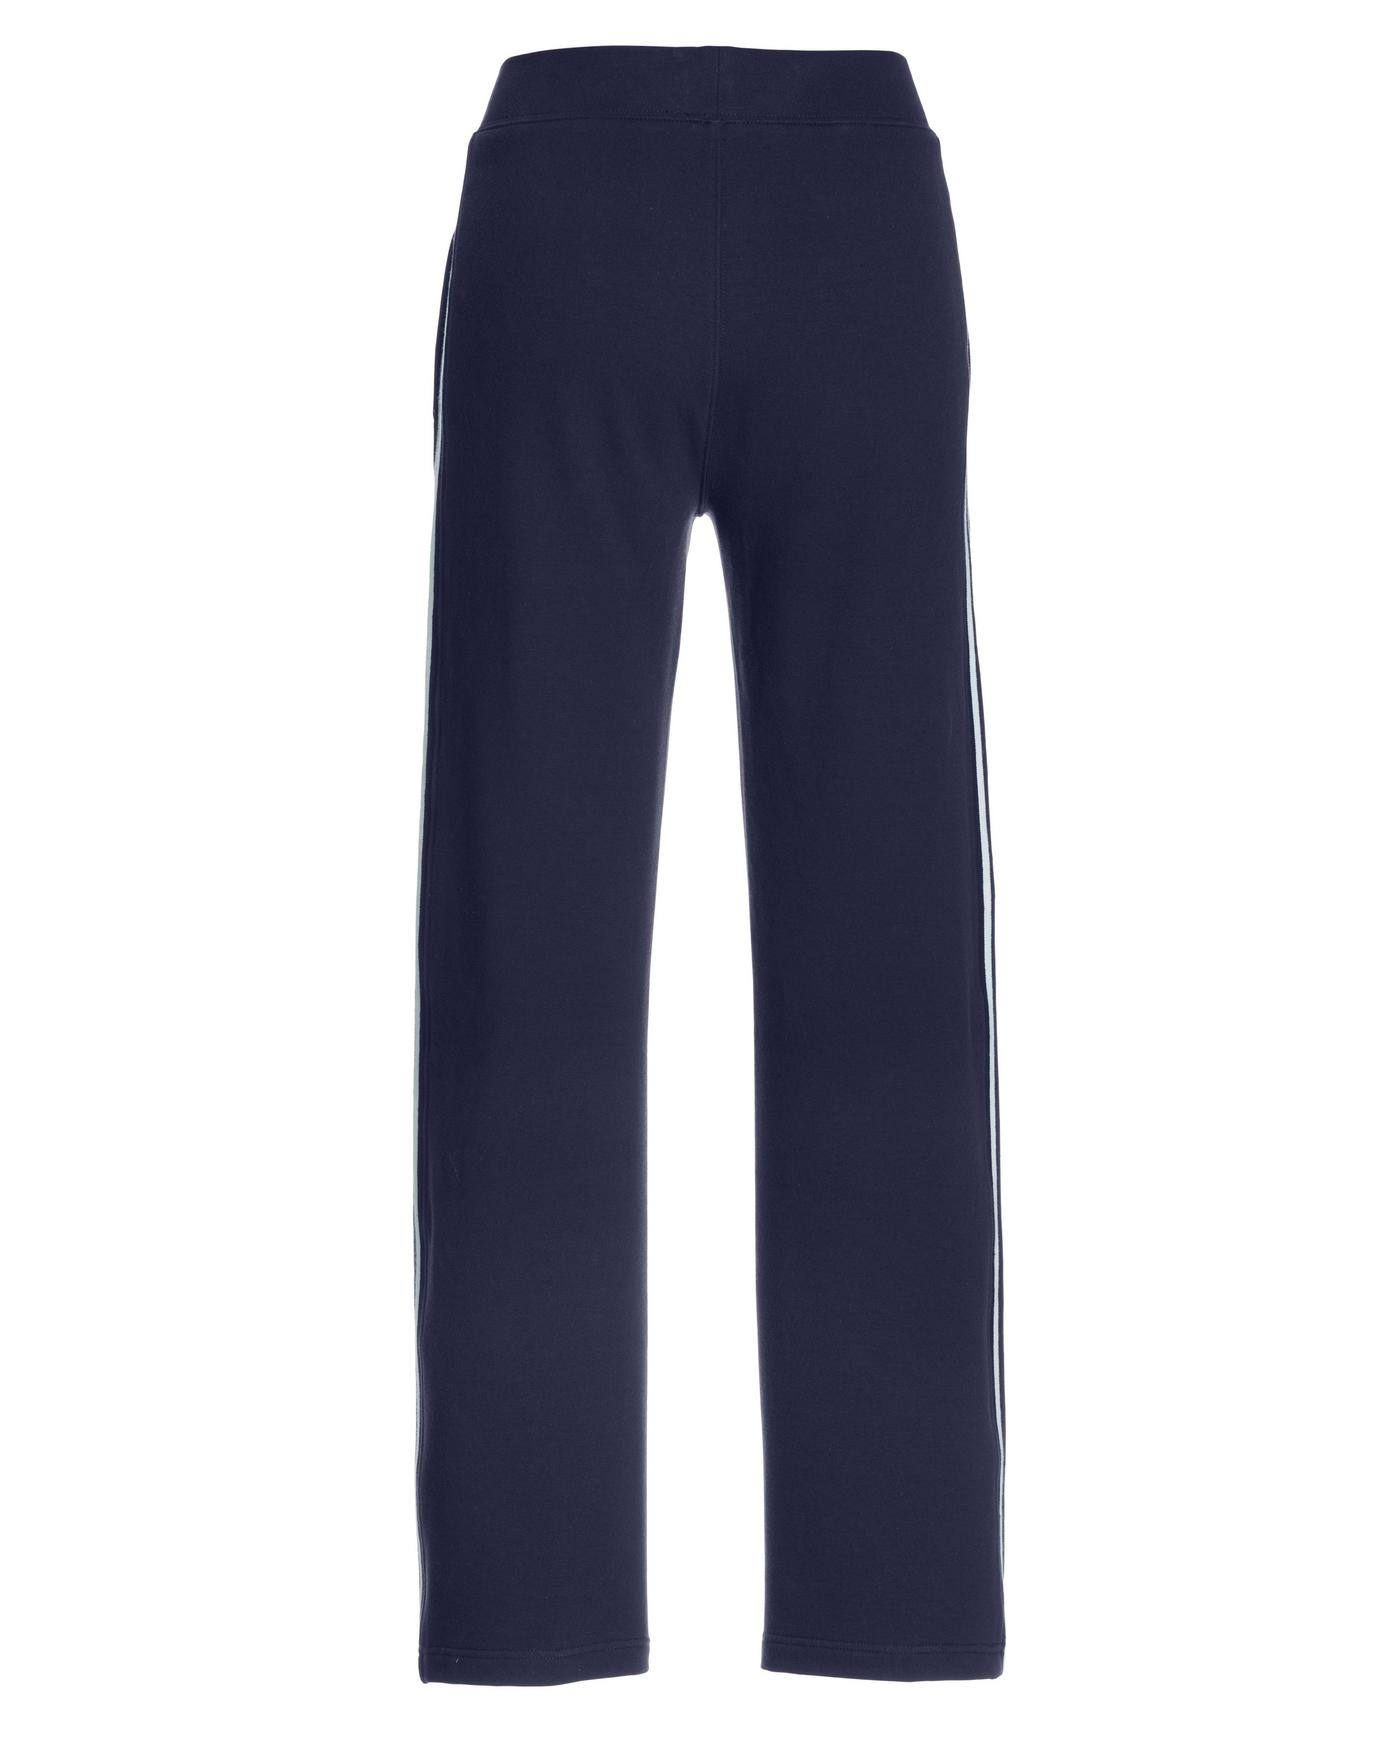 Striped French Terry Hardware Full Length Pant Set - Navy White